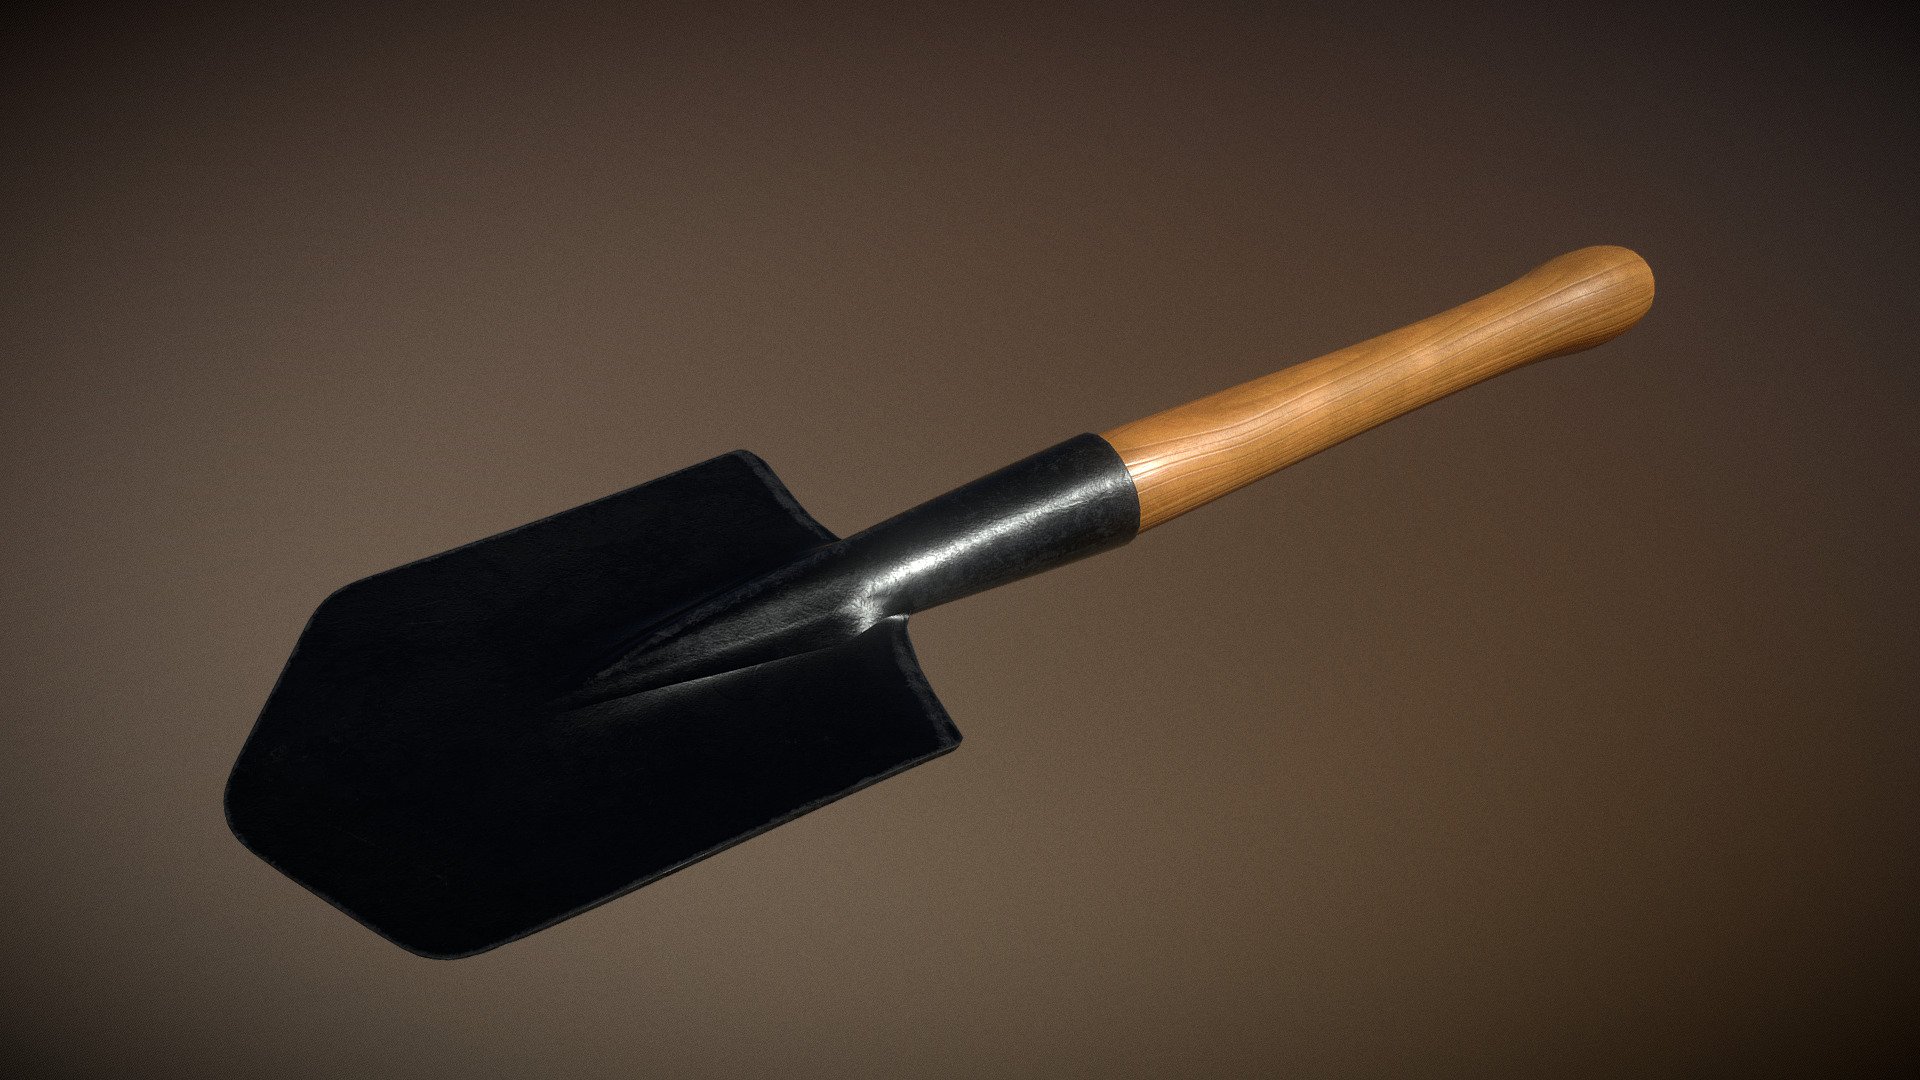 Realistic 3D model of the Shovel survival item.
Workflow: Maya -&gt; ZBrush -&gt; Substance Painter

The model is 2.2k tris and the textures are 4k




Low poly model FBX

All the materials are named

Clean UVs (Non-overlapping)

Real-world scale

5 Texture/Maps - 4096*4096

Diffuse(Albedo)

Ambient occlusion(AO)

Metallic

Roughness

Normal
 - Shovel - Buy Royalty Free 3D model by leandrojsj 3d model